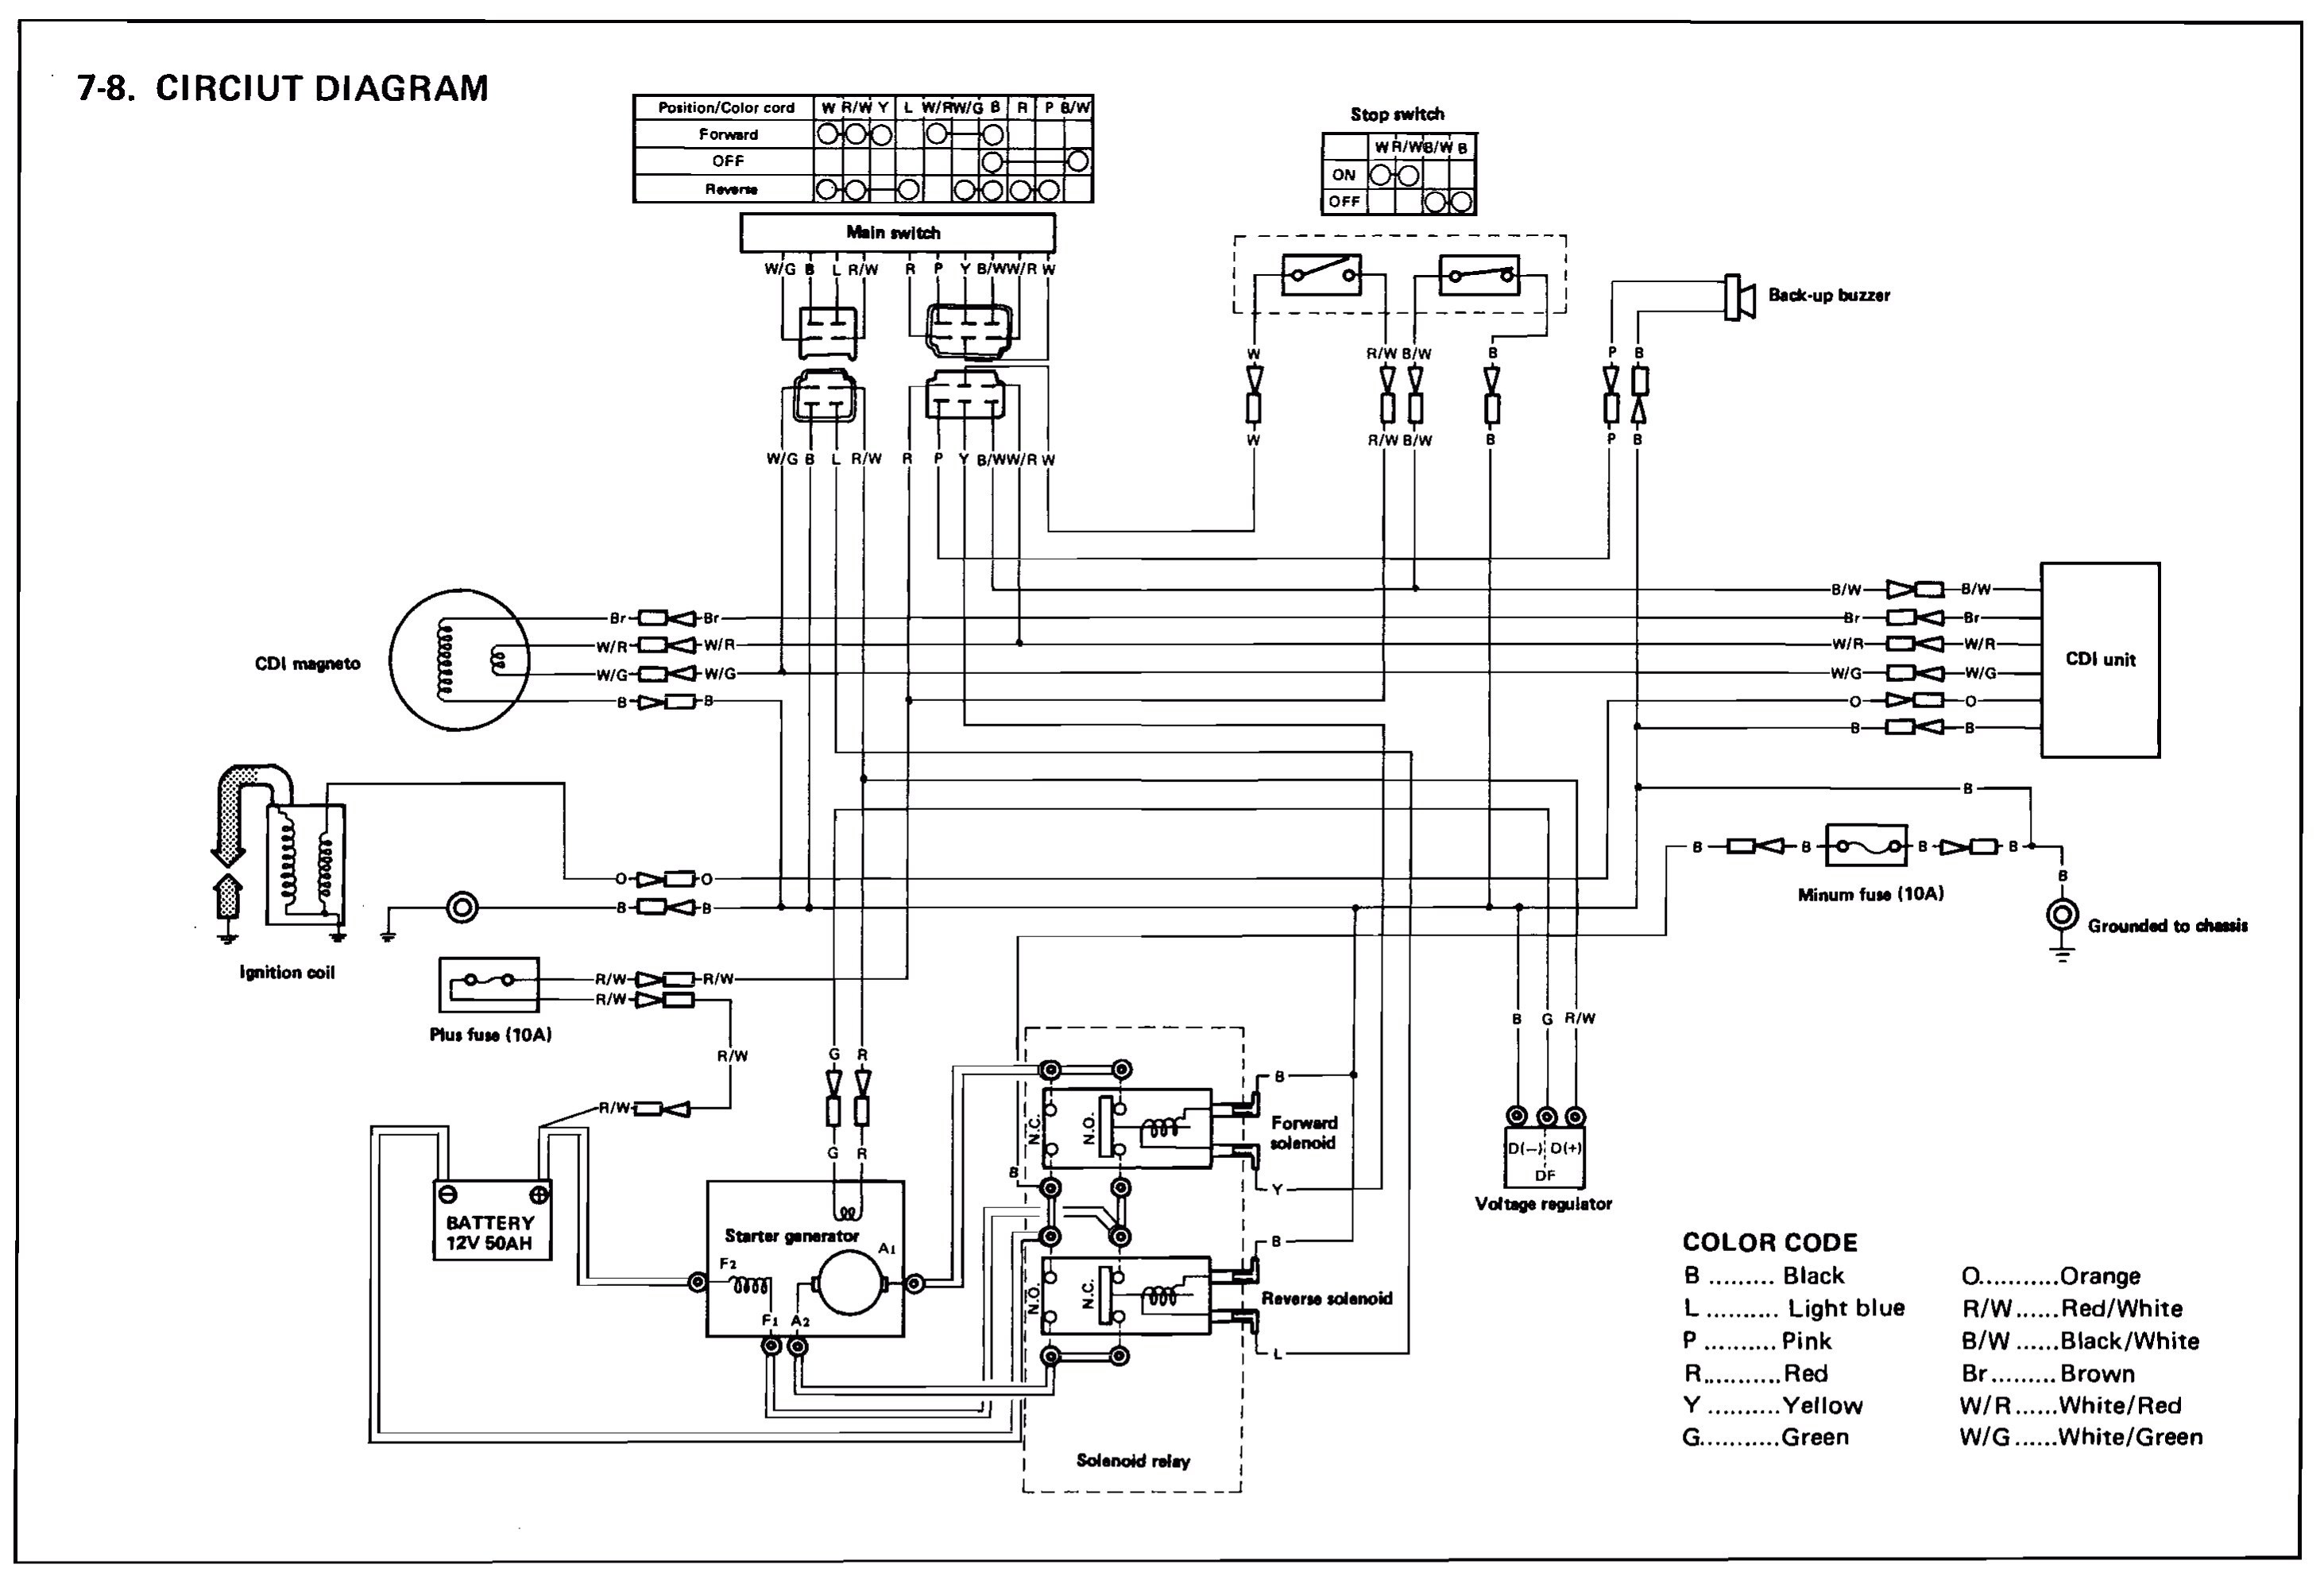 terrible wiring diagram wiring diagram operations bad wire diagram diagram data schema bad cable diagram wiring